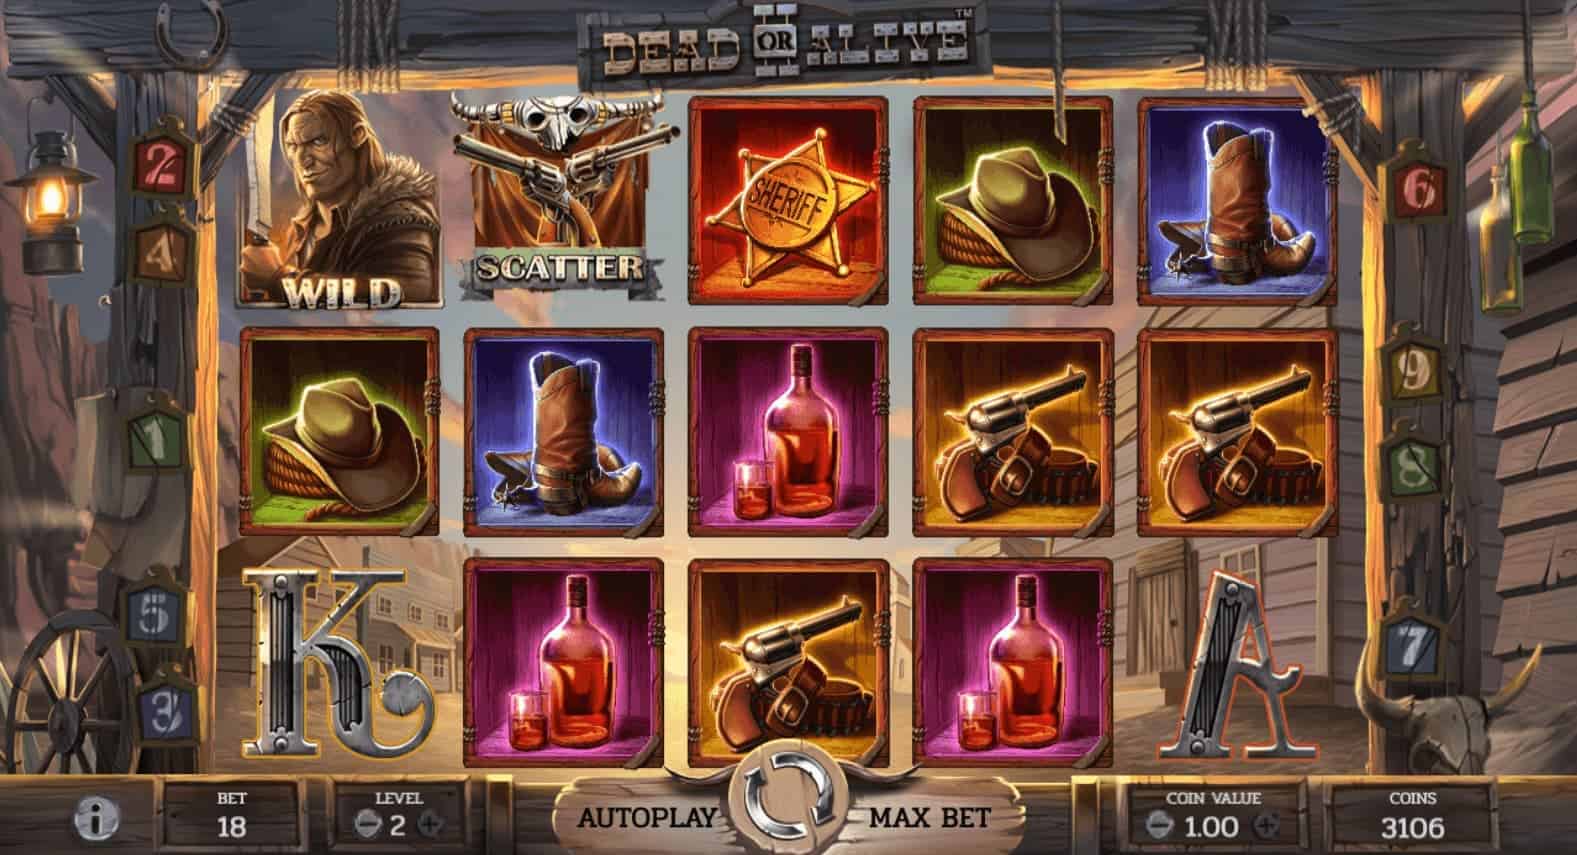 screenshot of Dead or Alive 2 slot gameplay interface